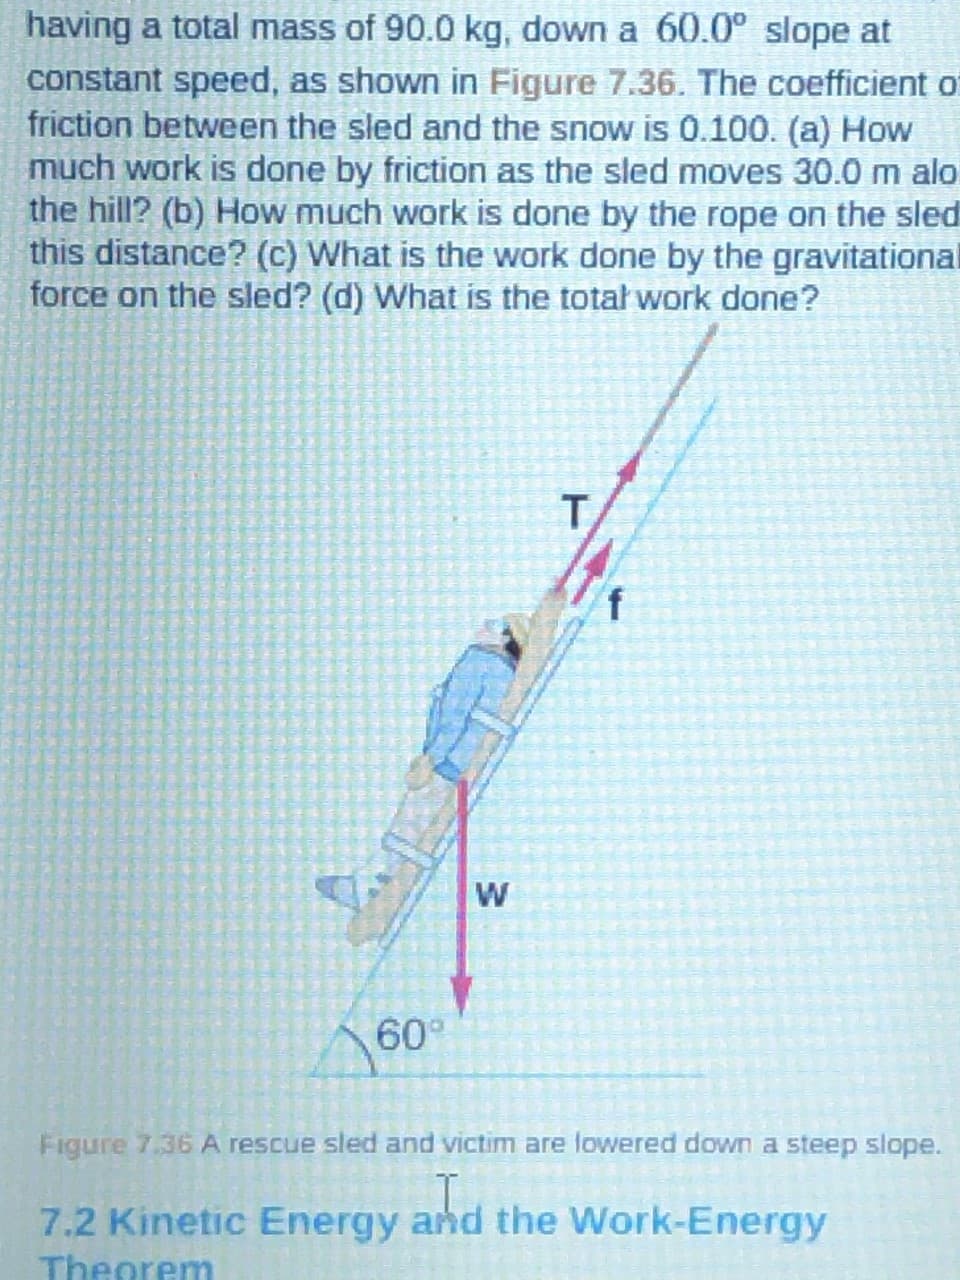 having a total mass of 90.0 kg, down a 60.0° slope at
constant speed, as shown in Figure 7.36. The coefficient of
friction between the sled and the snow is 0.100. (a) How
much work is done by friction as the sled moves 30.0 m alo.
the hill? (b) How much work is done by the rope on the sled
this distance? (c) What is the work done by the gravitational
force on the sled? (d) What is the total work done?
T,
W
60
Figure 7.36 A rescue sled and victim are lowered down a steep slope.
7.2 Kinetic Energy and the Work-Energy
Theorem
